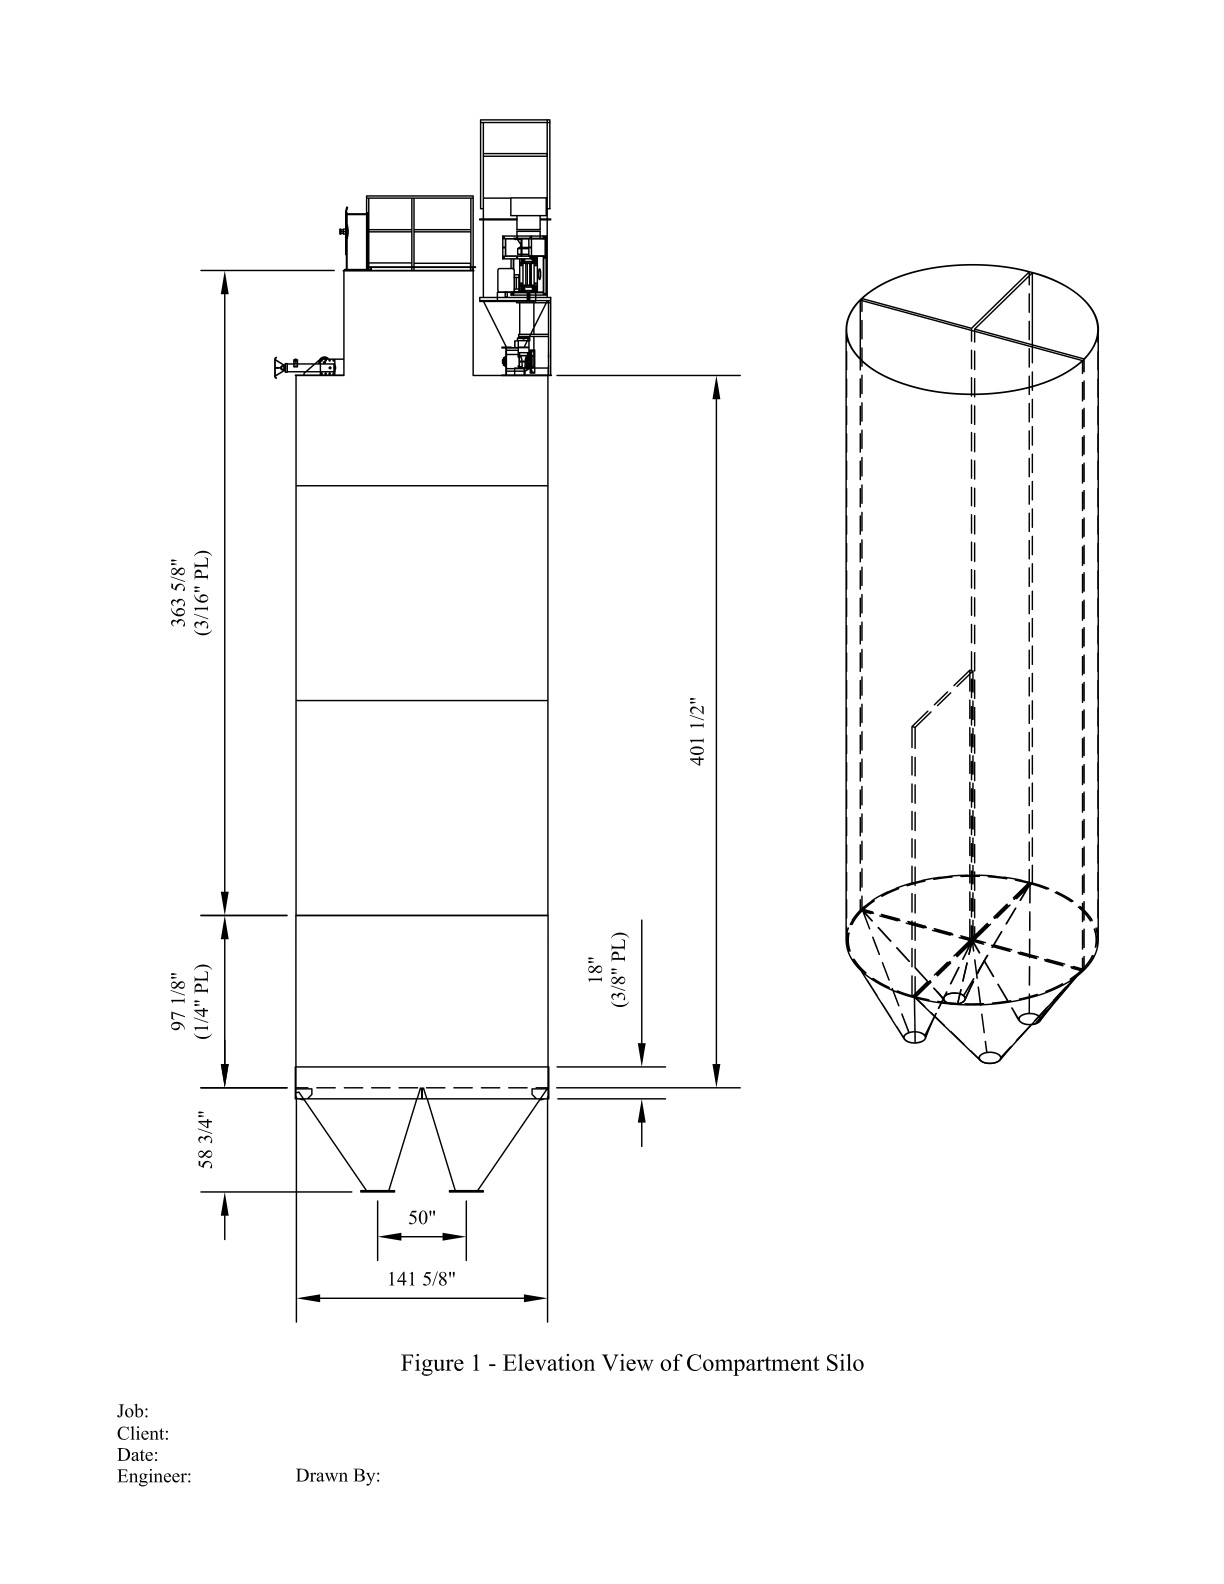 Example of silo functional design